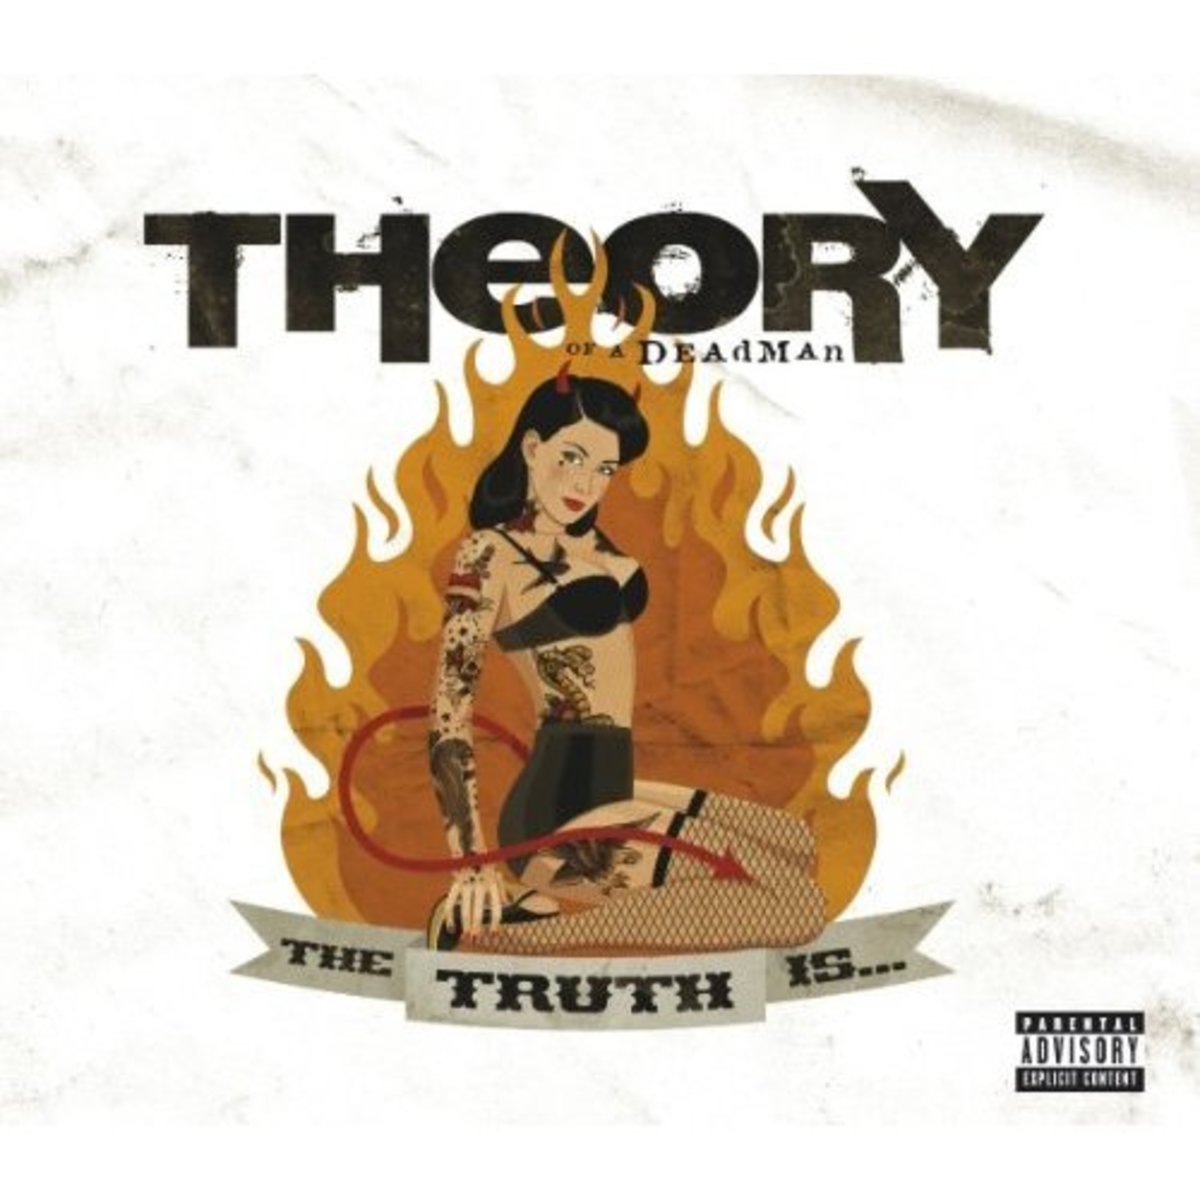 The Truth Is… special edition album cover.